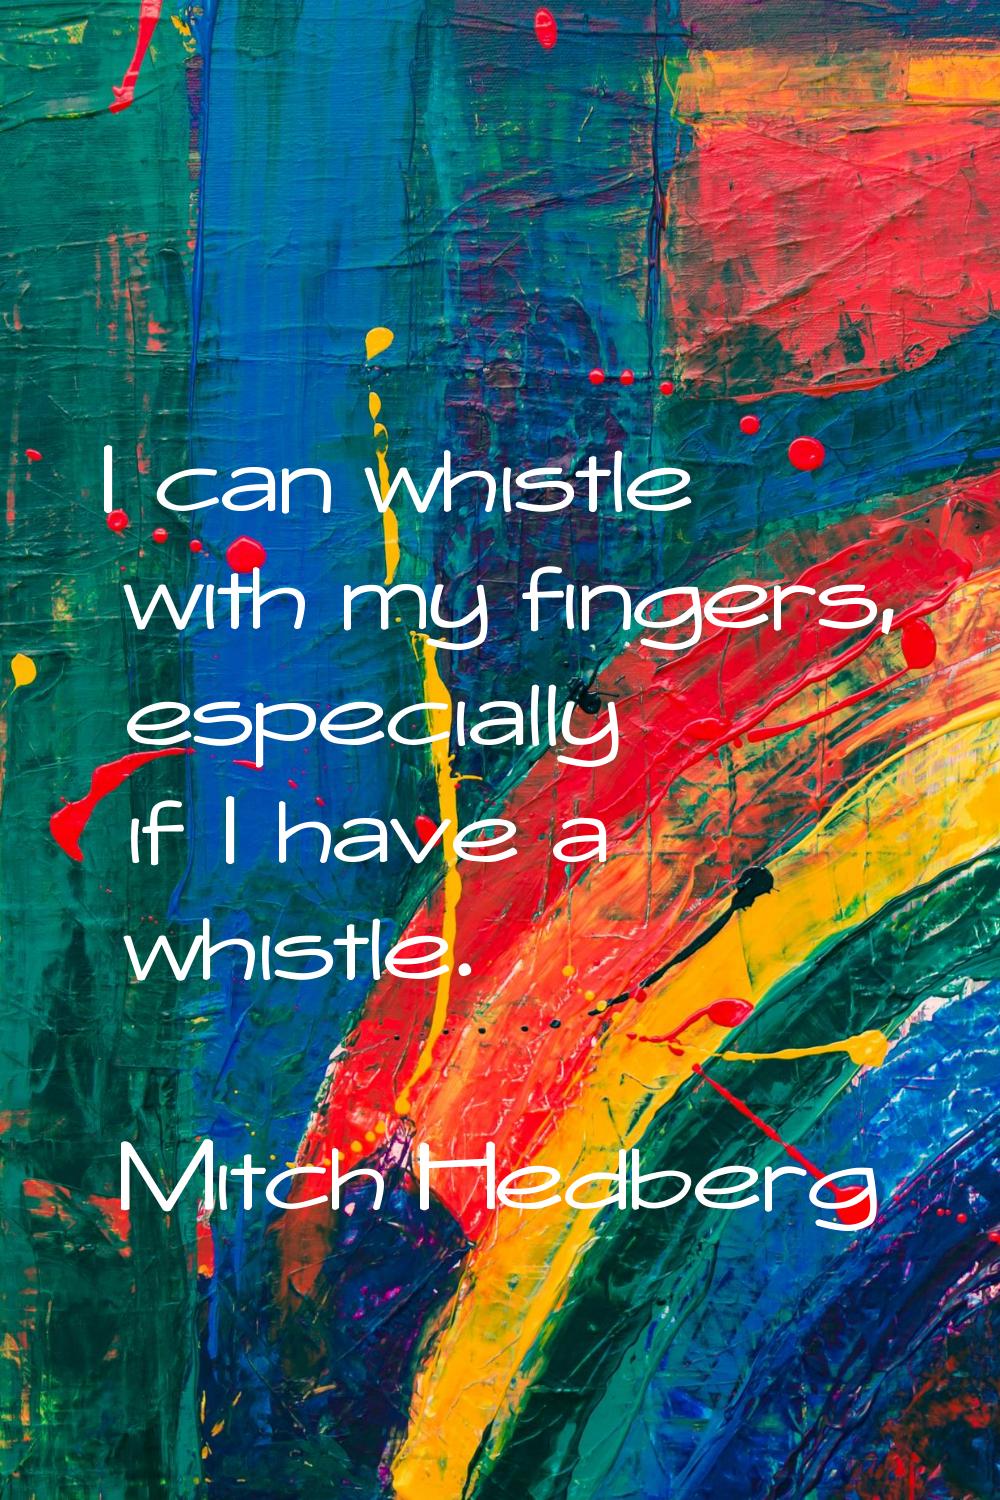 I can whistle with my fingers, especially if I have a whistle.